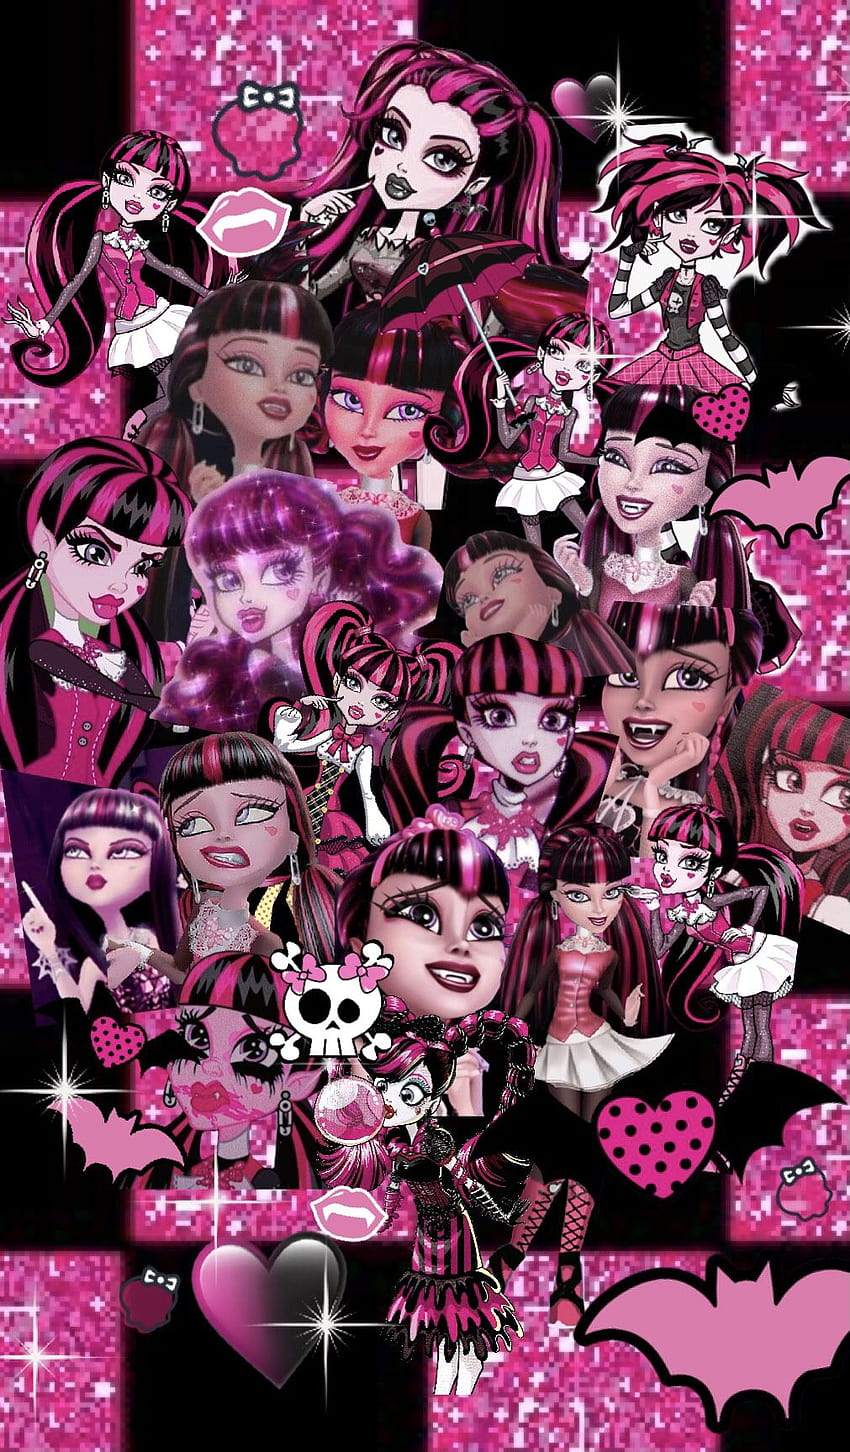 10 Monster High HD Wallpapers and Backgrounds